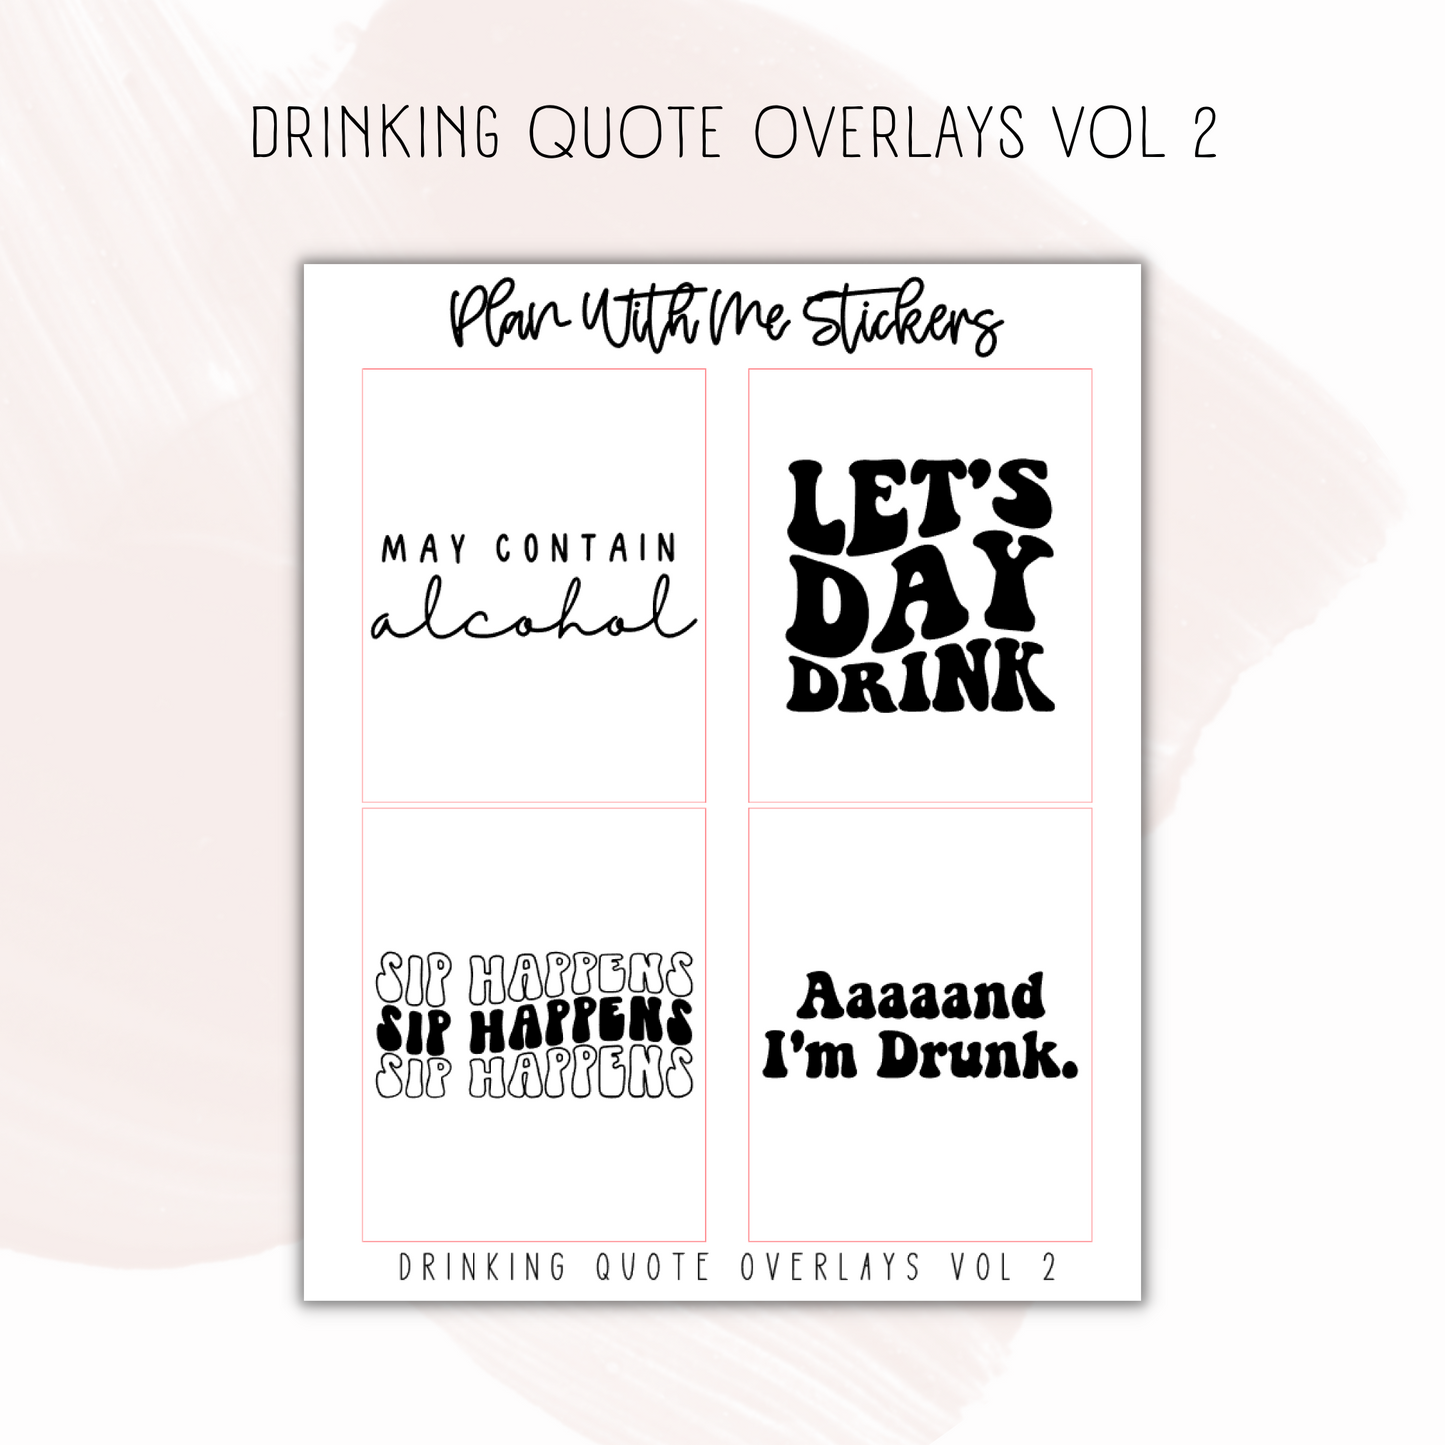 Drinking Quote Overlays Vol 2